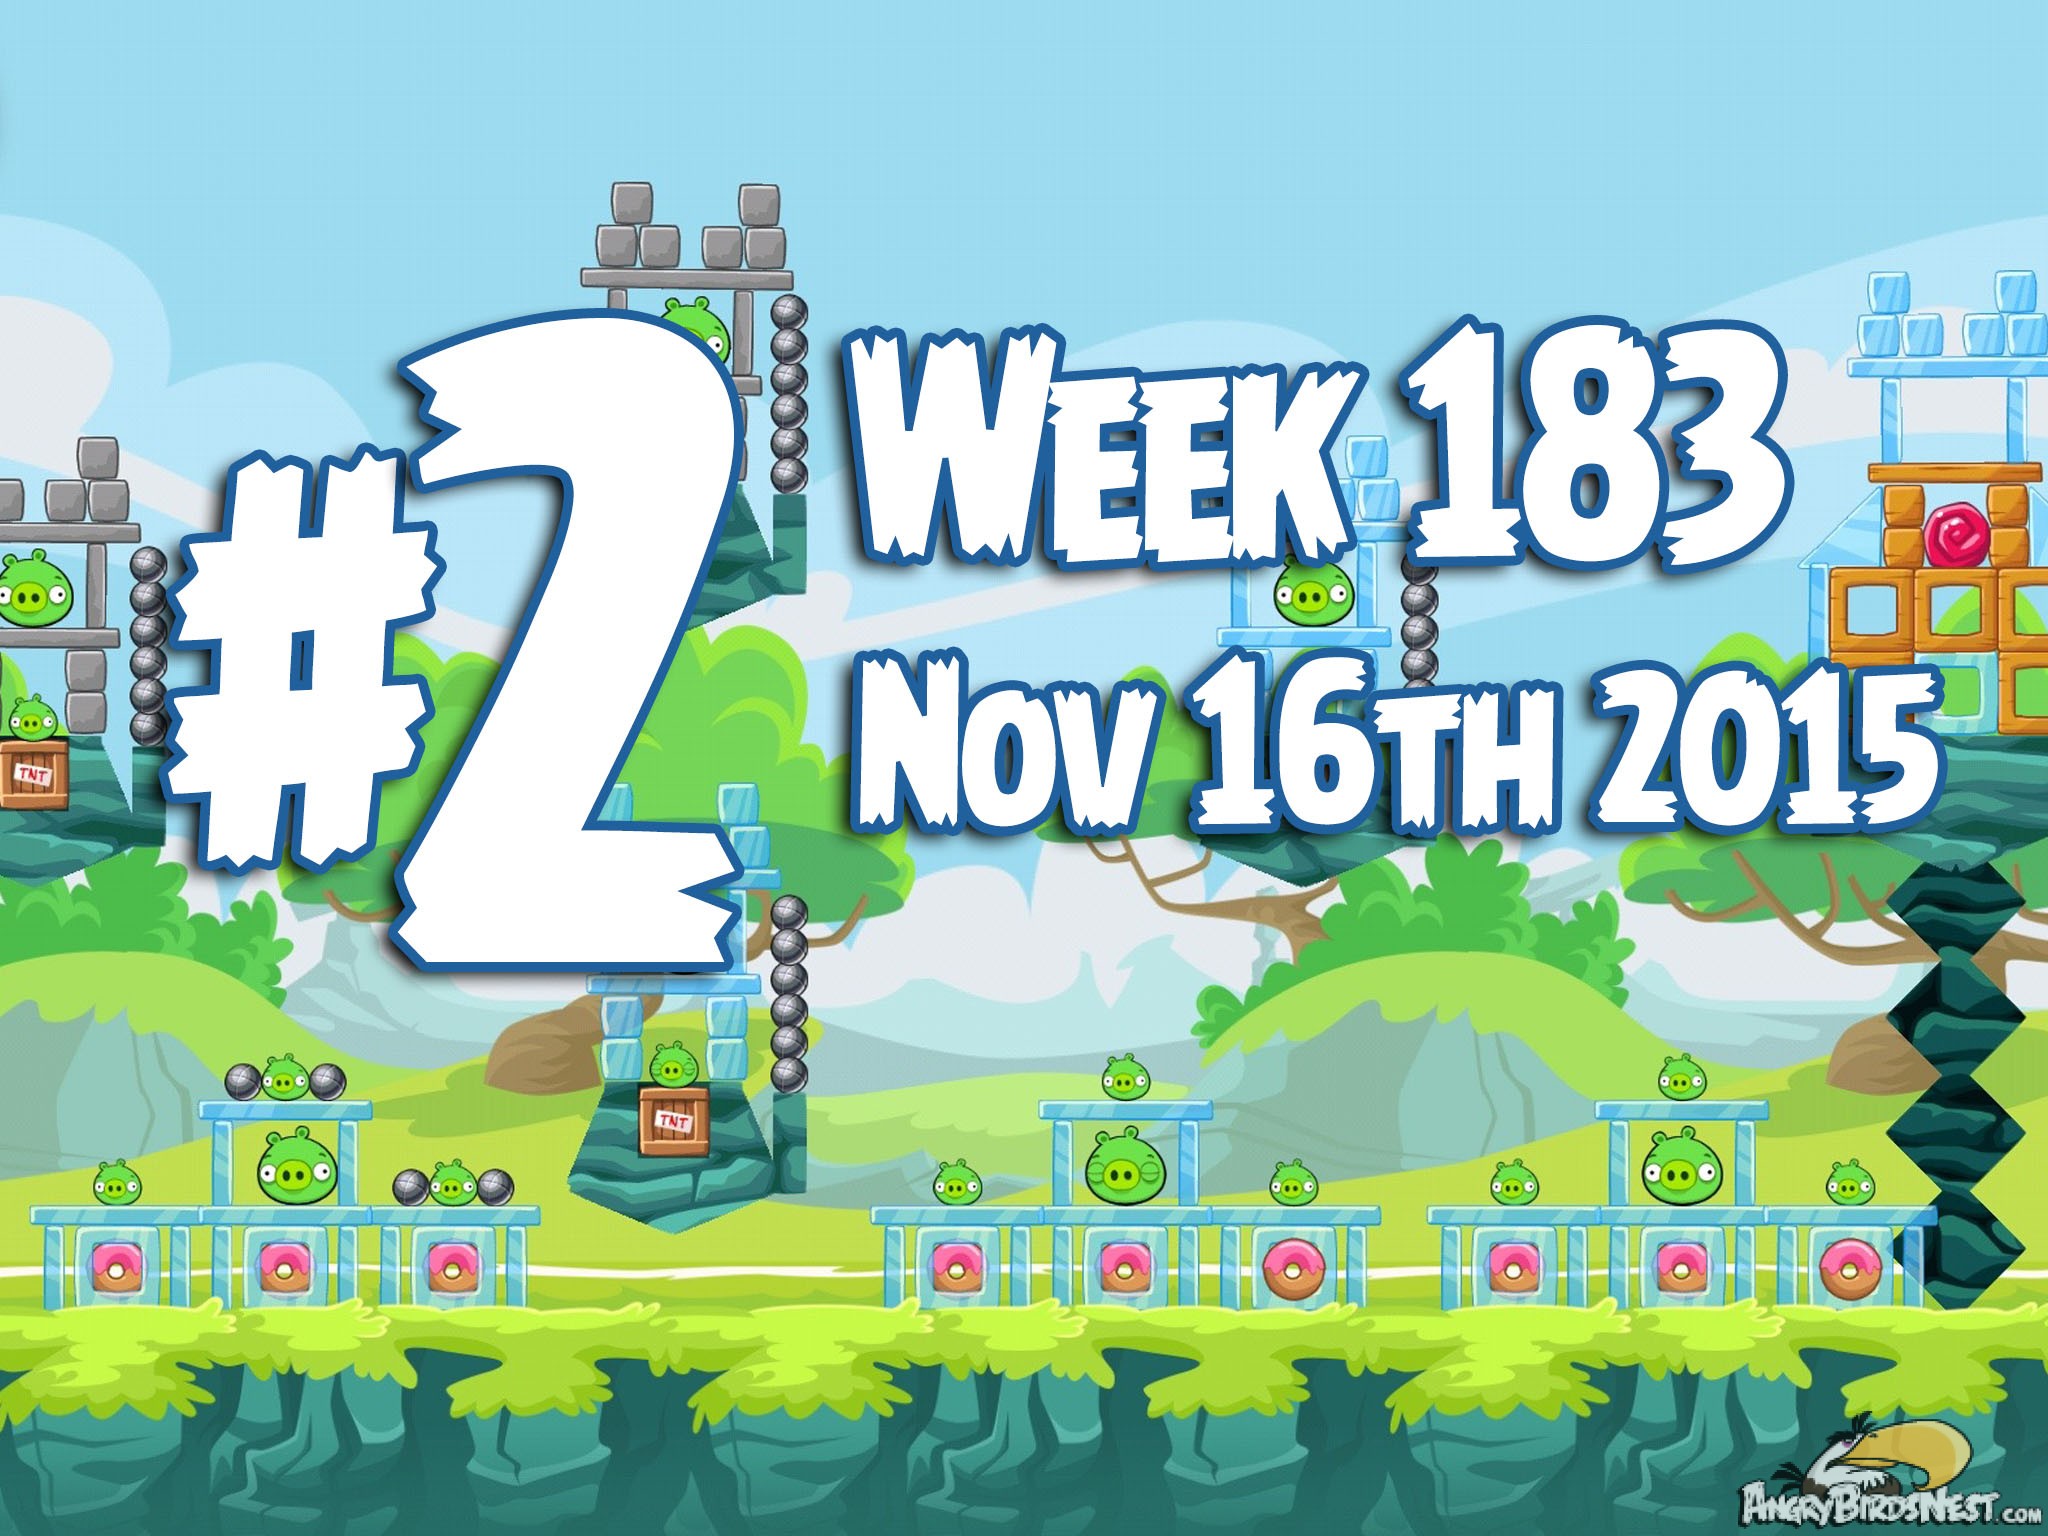 Angry Birds Friends Tournament Week 183 Level 2